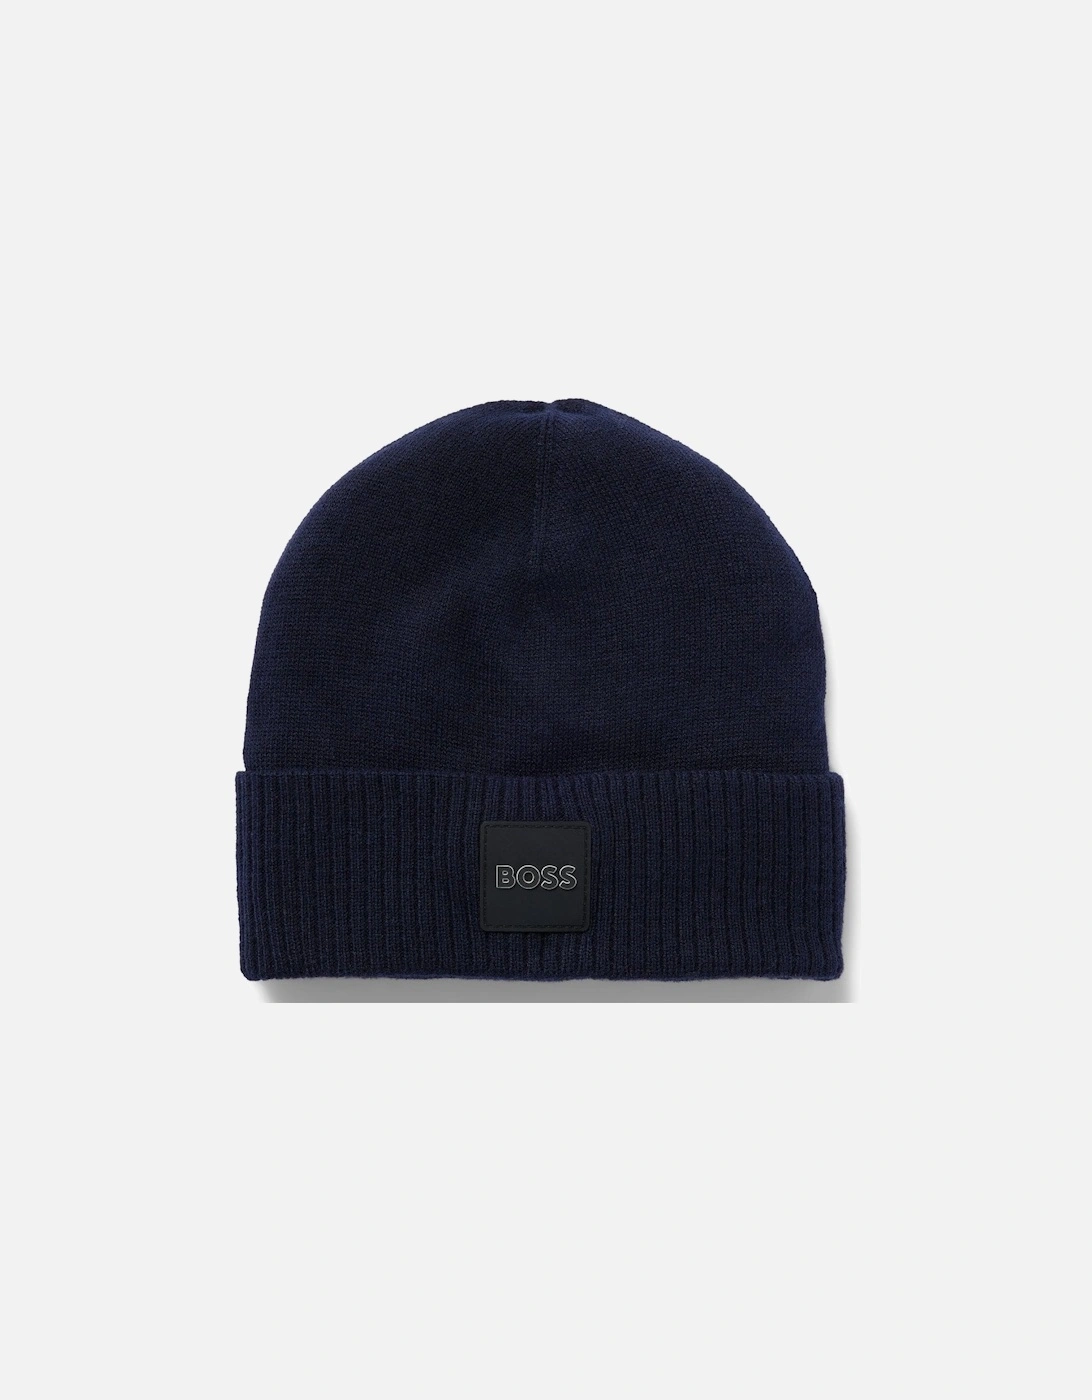 Boy's Navy Blue Knitted Hat., 5 of 4